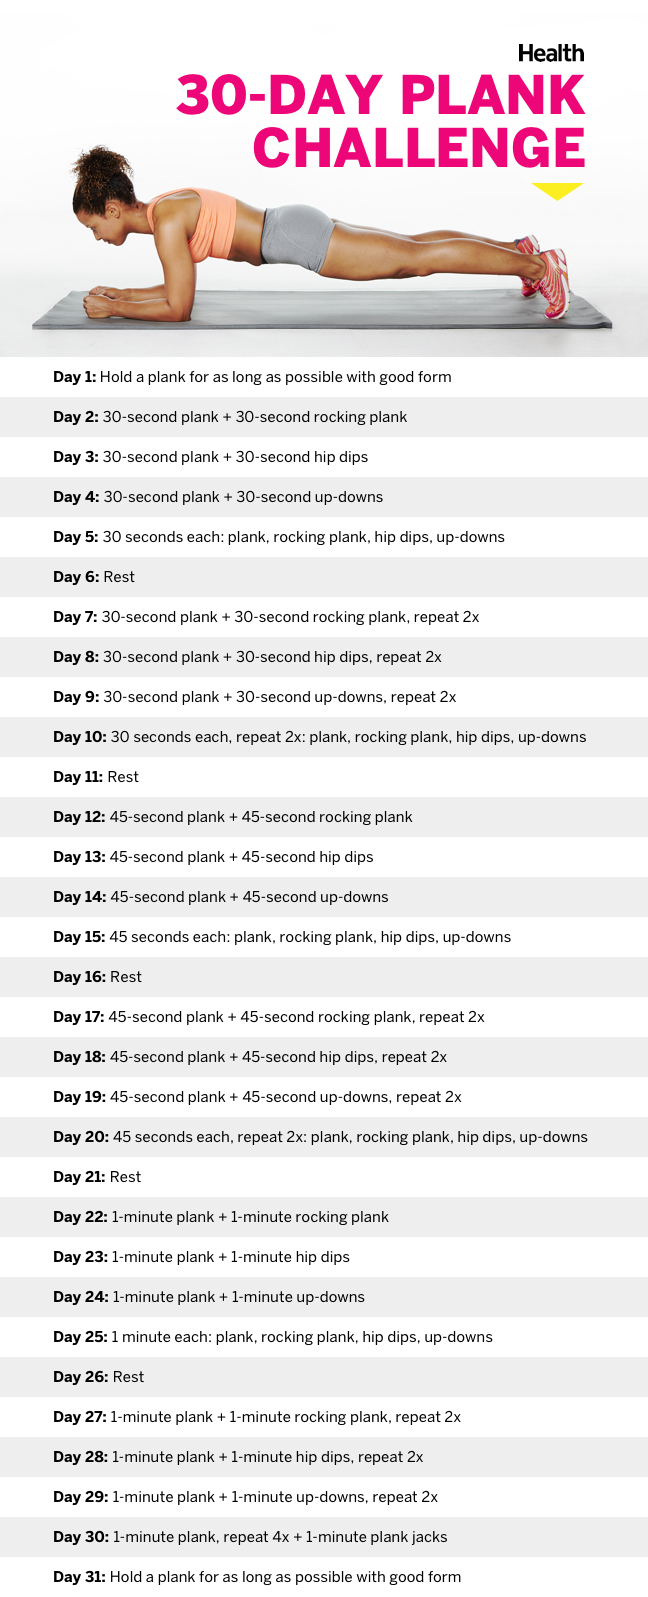 30Day Plank Challenge | Health pertaining to 30 Day Plank Challenge Printable